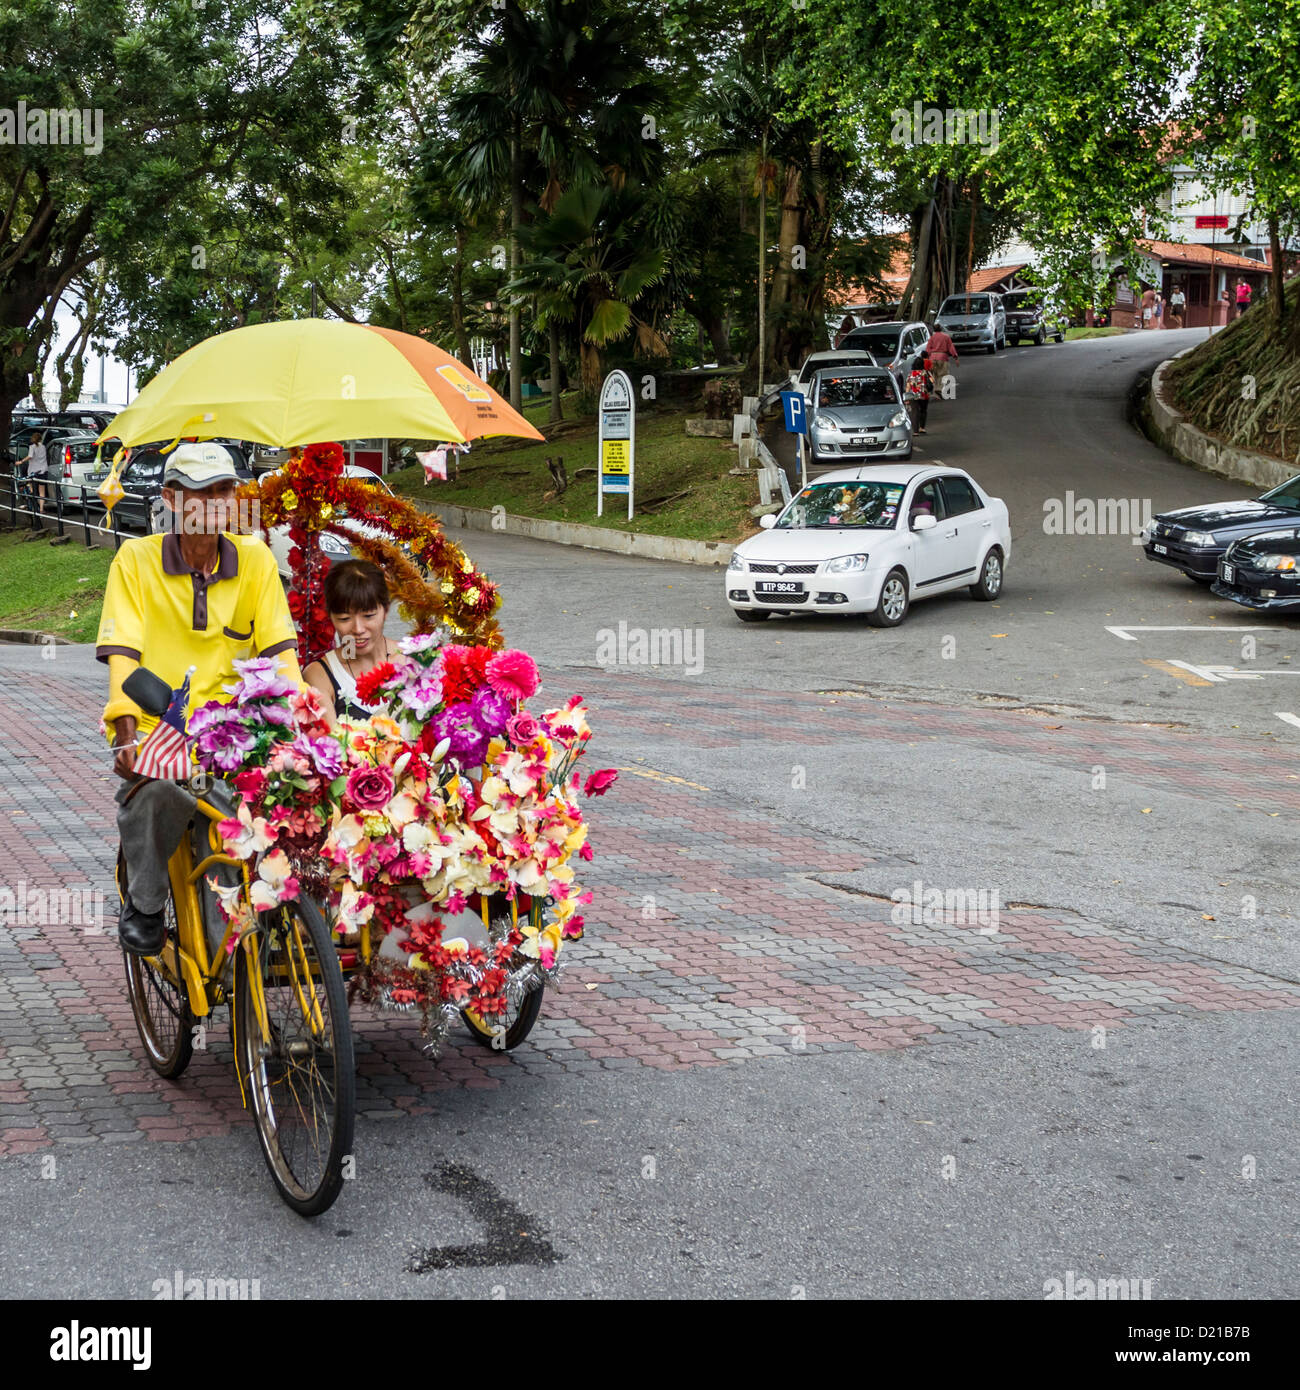 Tourists on trishaw ride in Melaka, Malaysia, are a popular tourist attraction Stock Photo